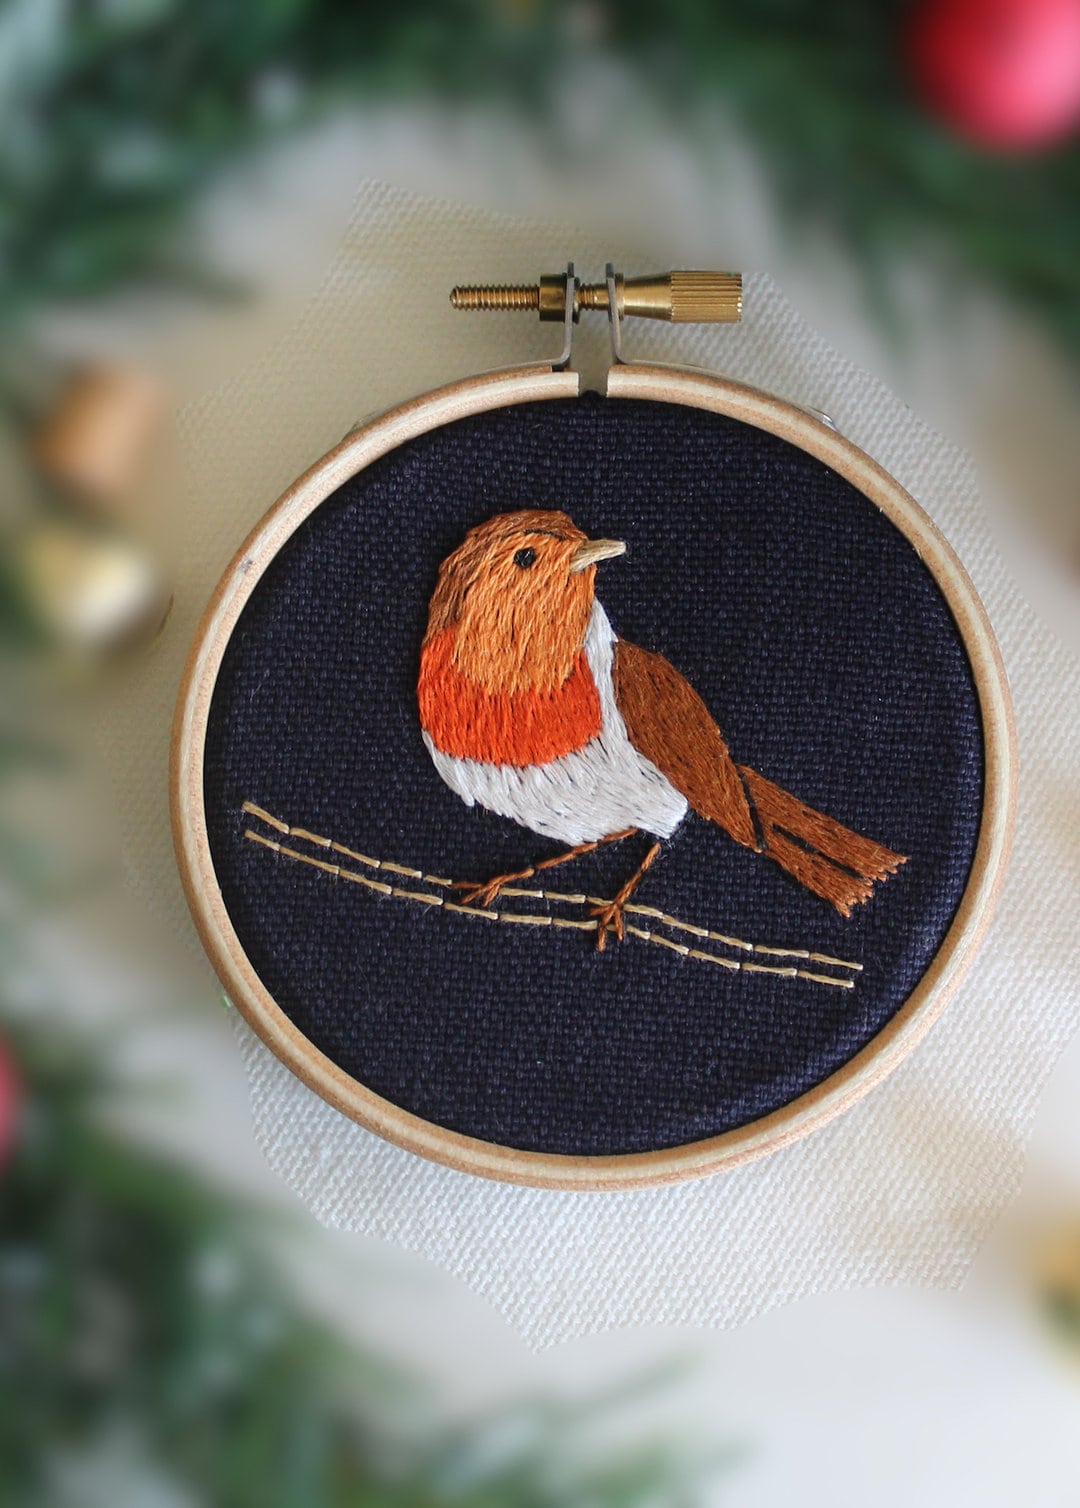 Christmas embroidery ideas you're sure to love - From Britain with Love